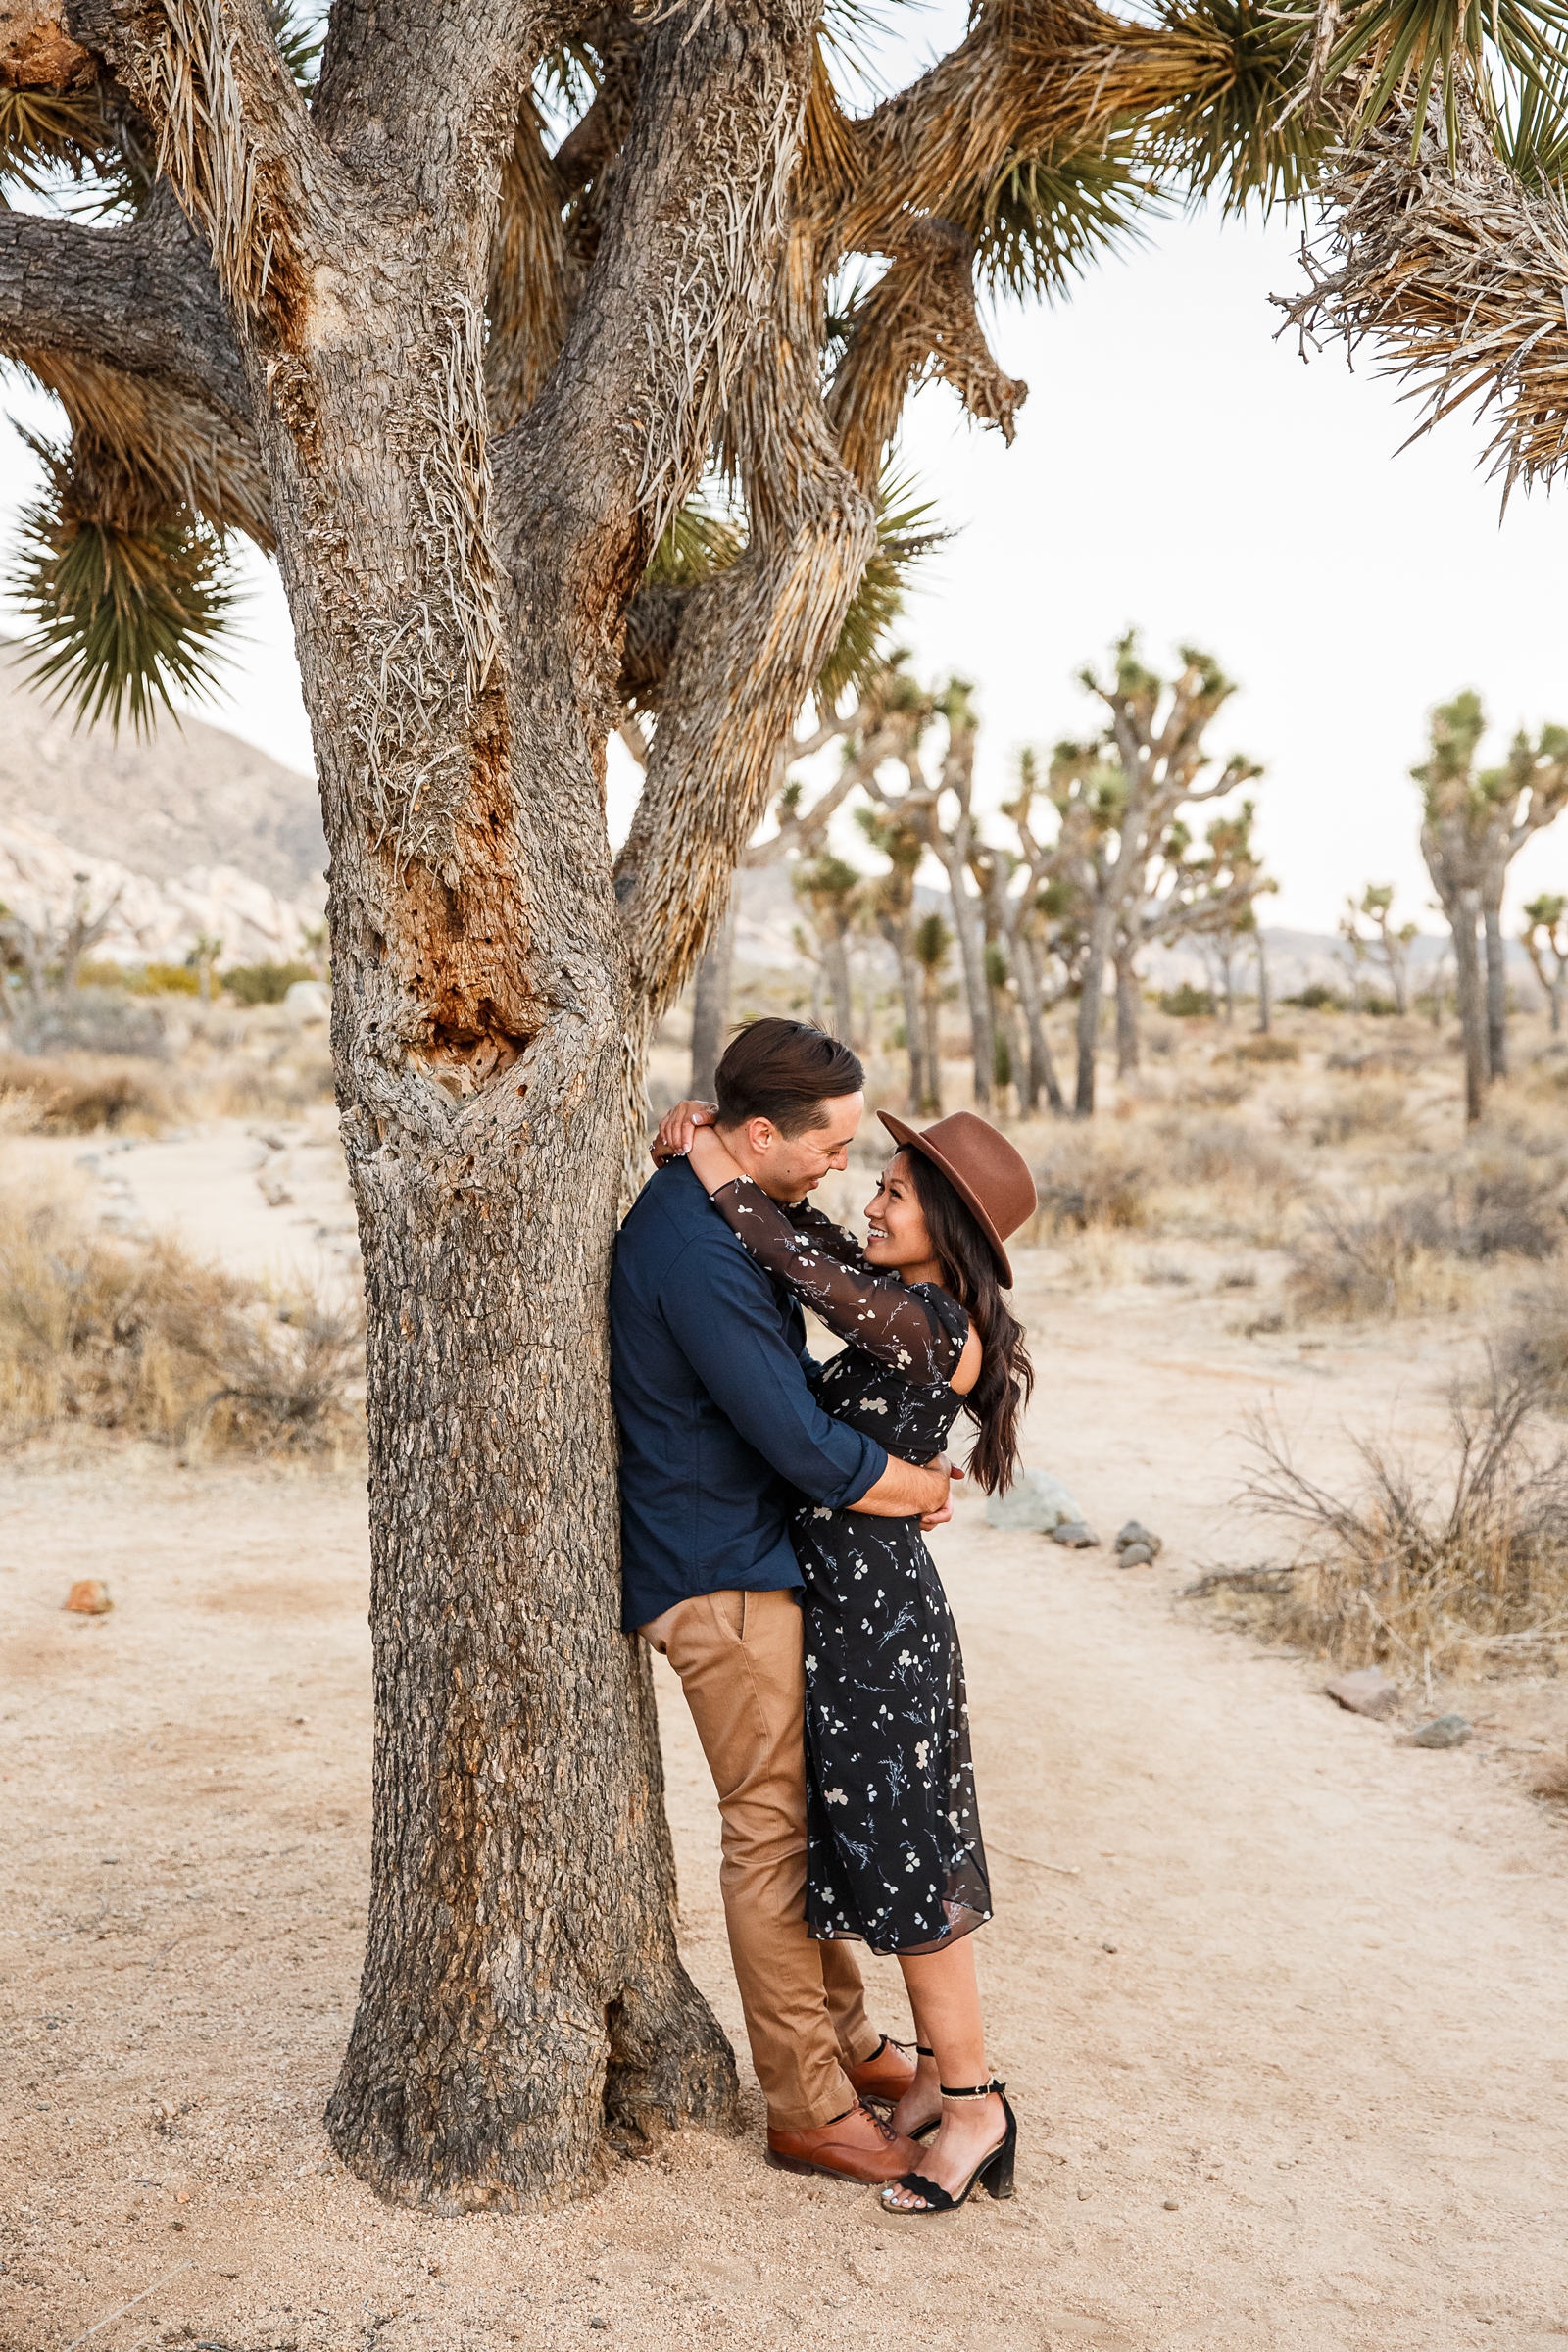 Adorable engaged couple in Joshua Tree National Park.